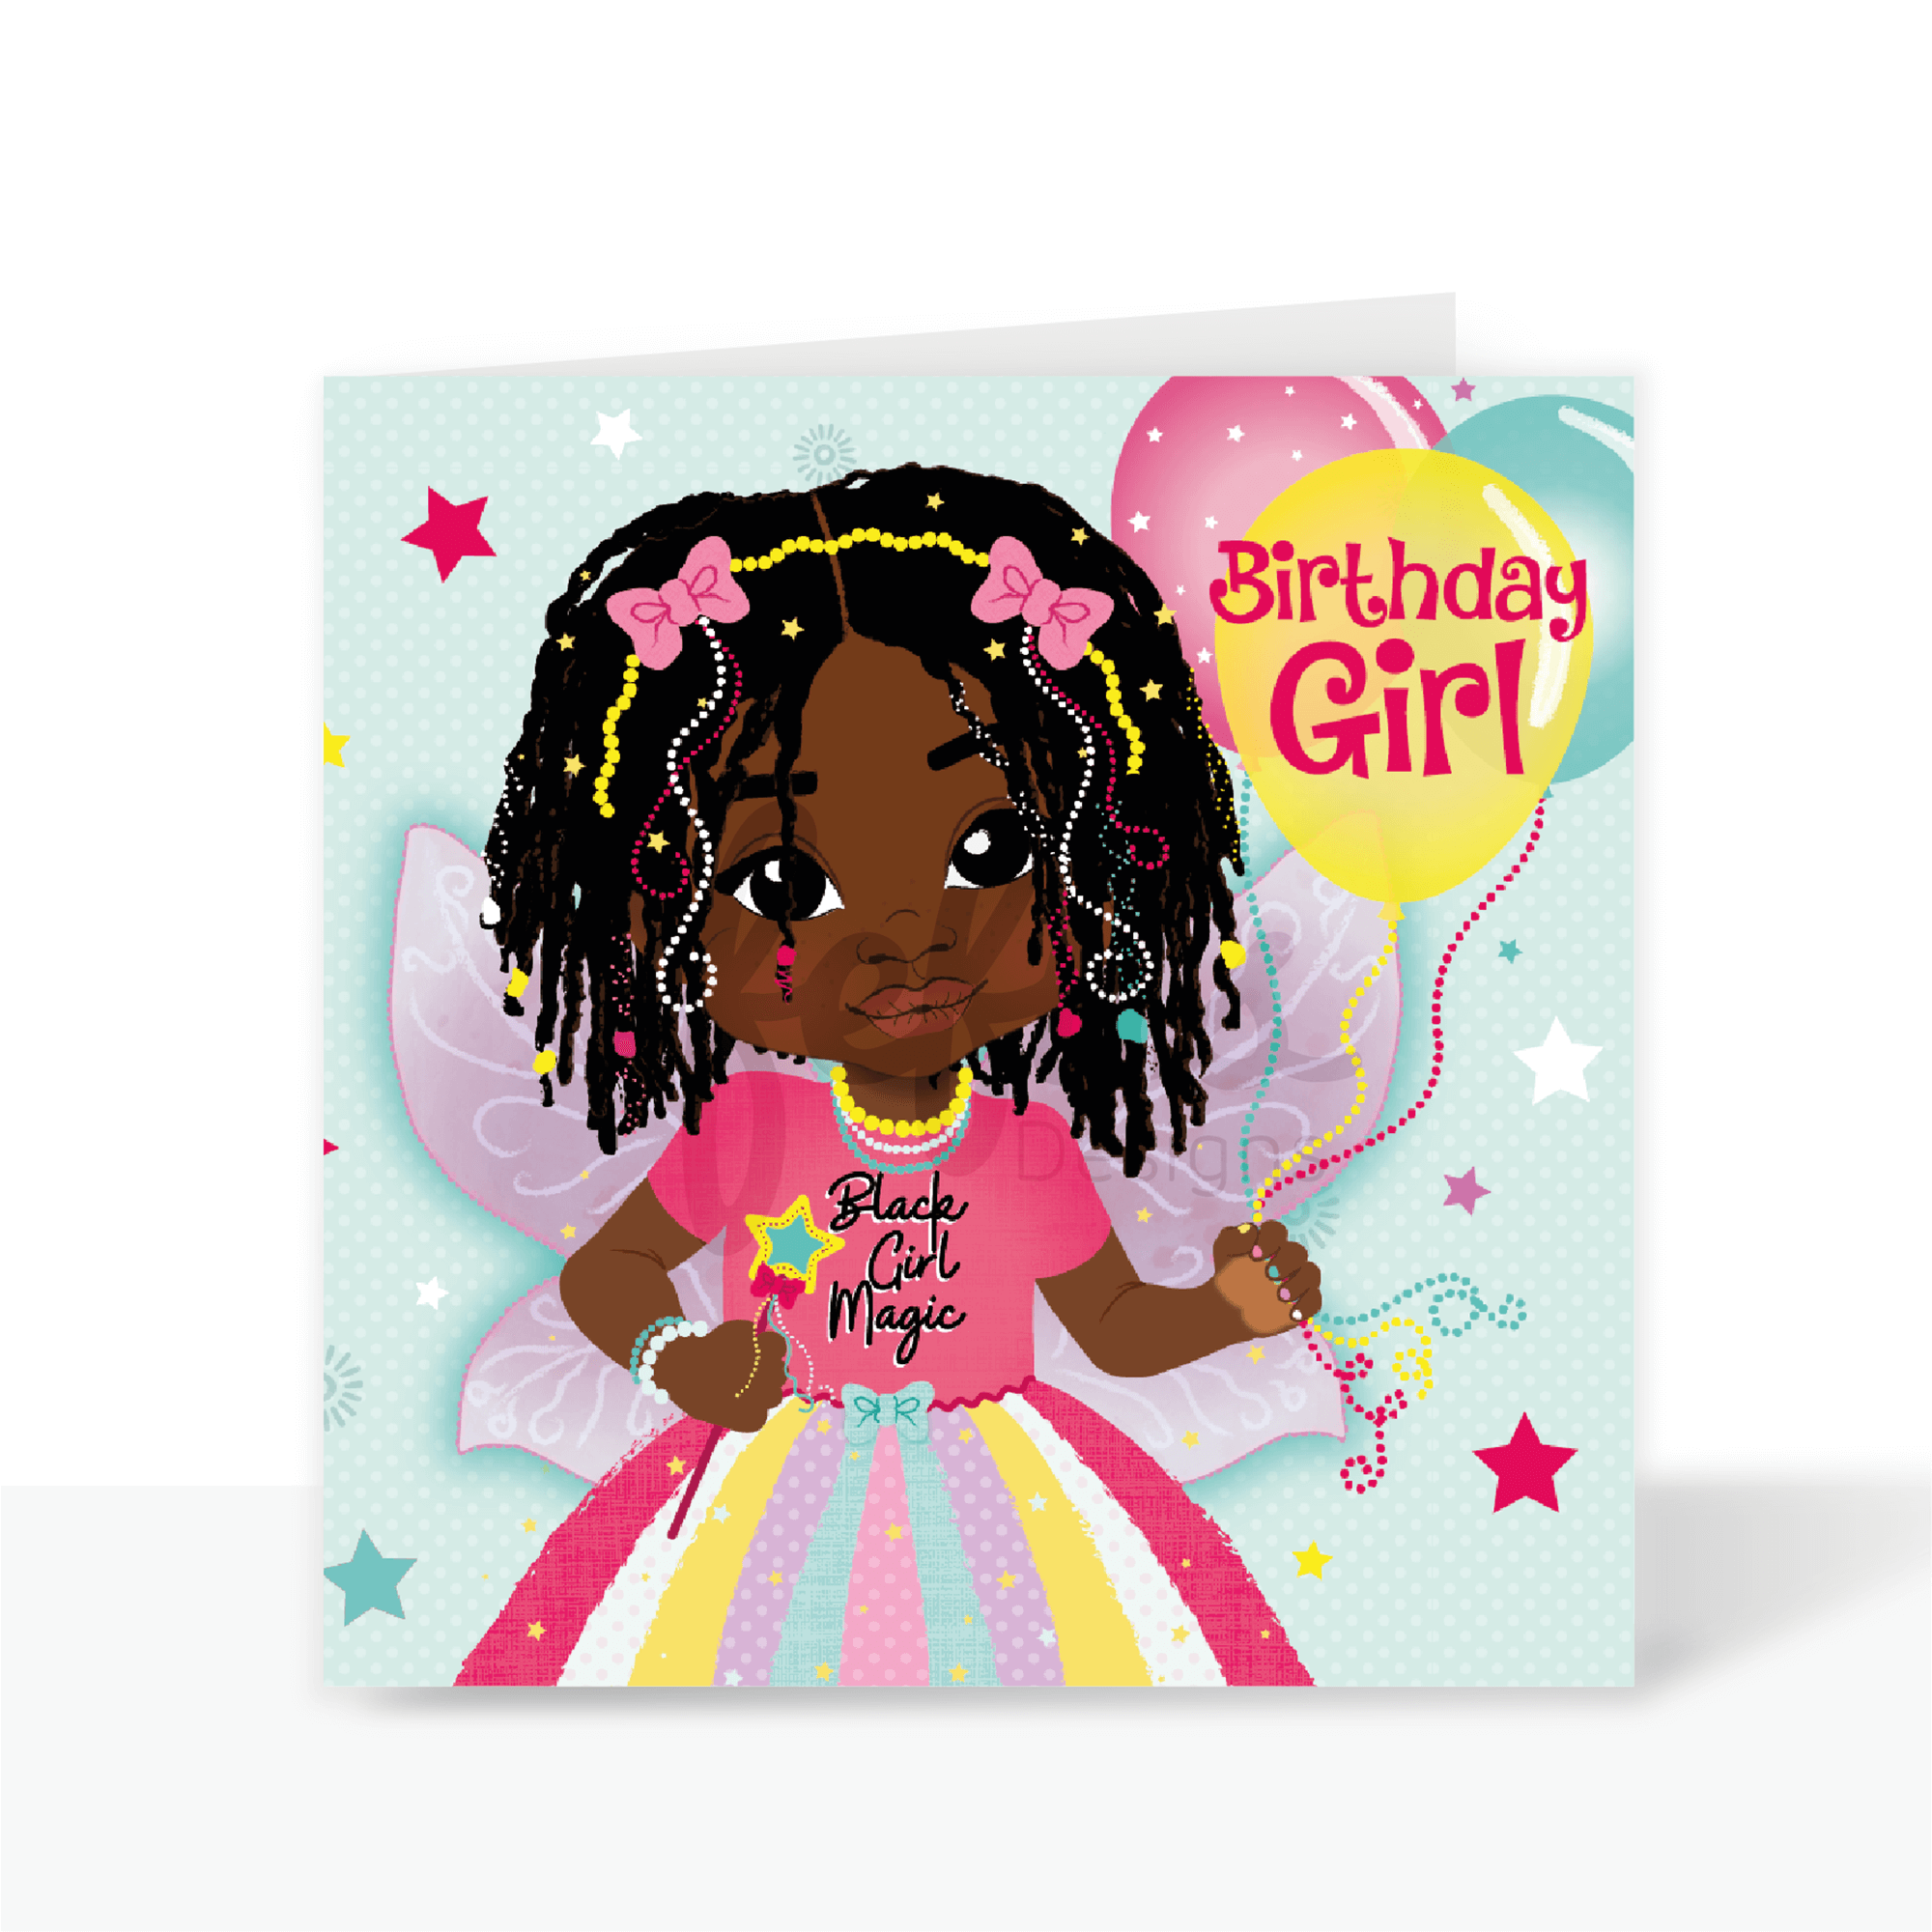 A birthday card featuring a brown girl with dreadlocks and butterfly wings against a colorful background. The card reads "Happy Birthday". 